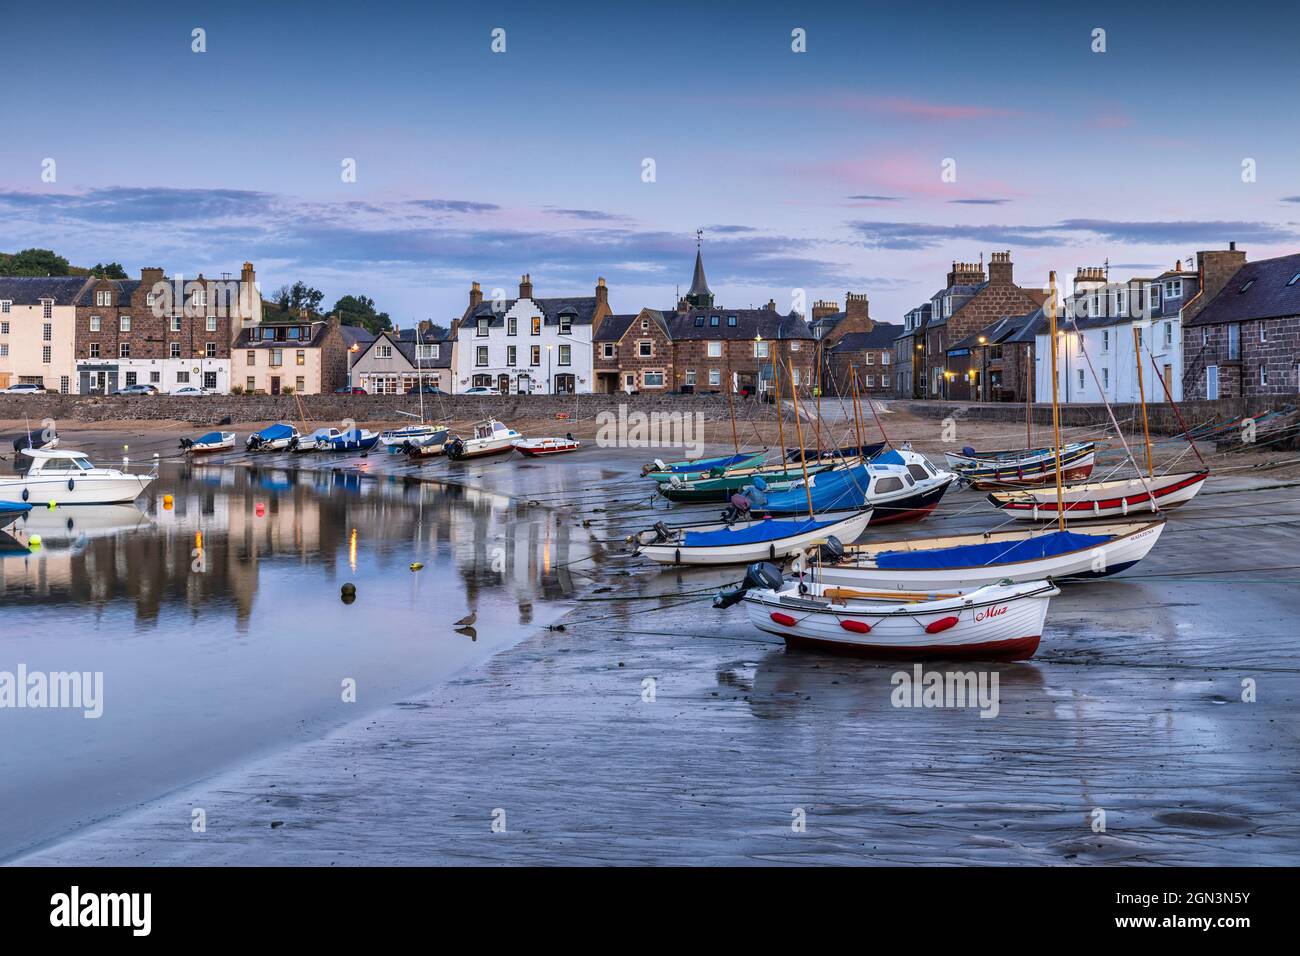 Early morning at Stonehaven, a picturesque harbour town in Aberdeenshire lying to the south of Aberdeen on Scotland's north east coast. Stock Photo